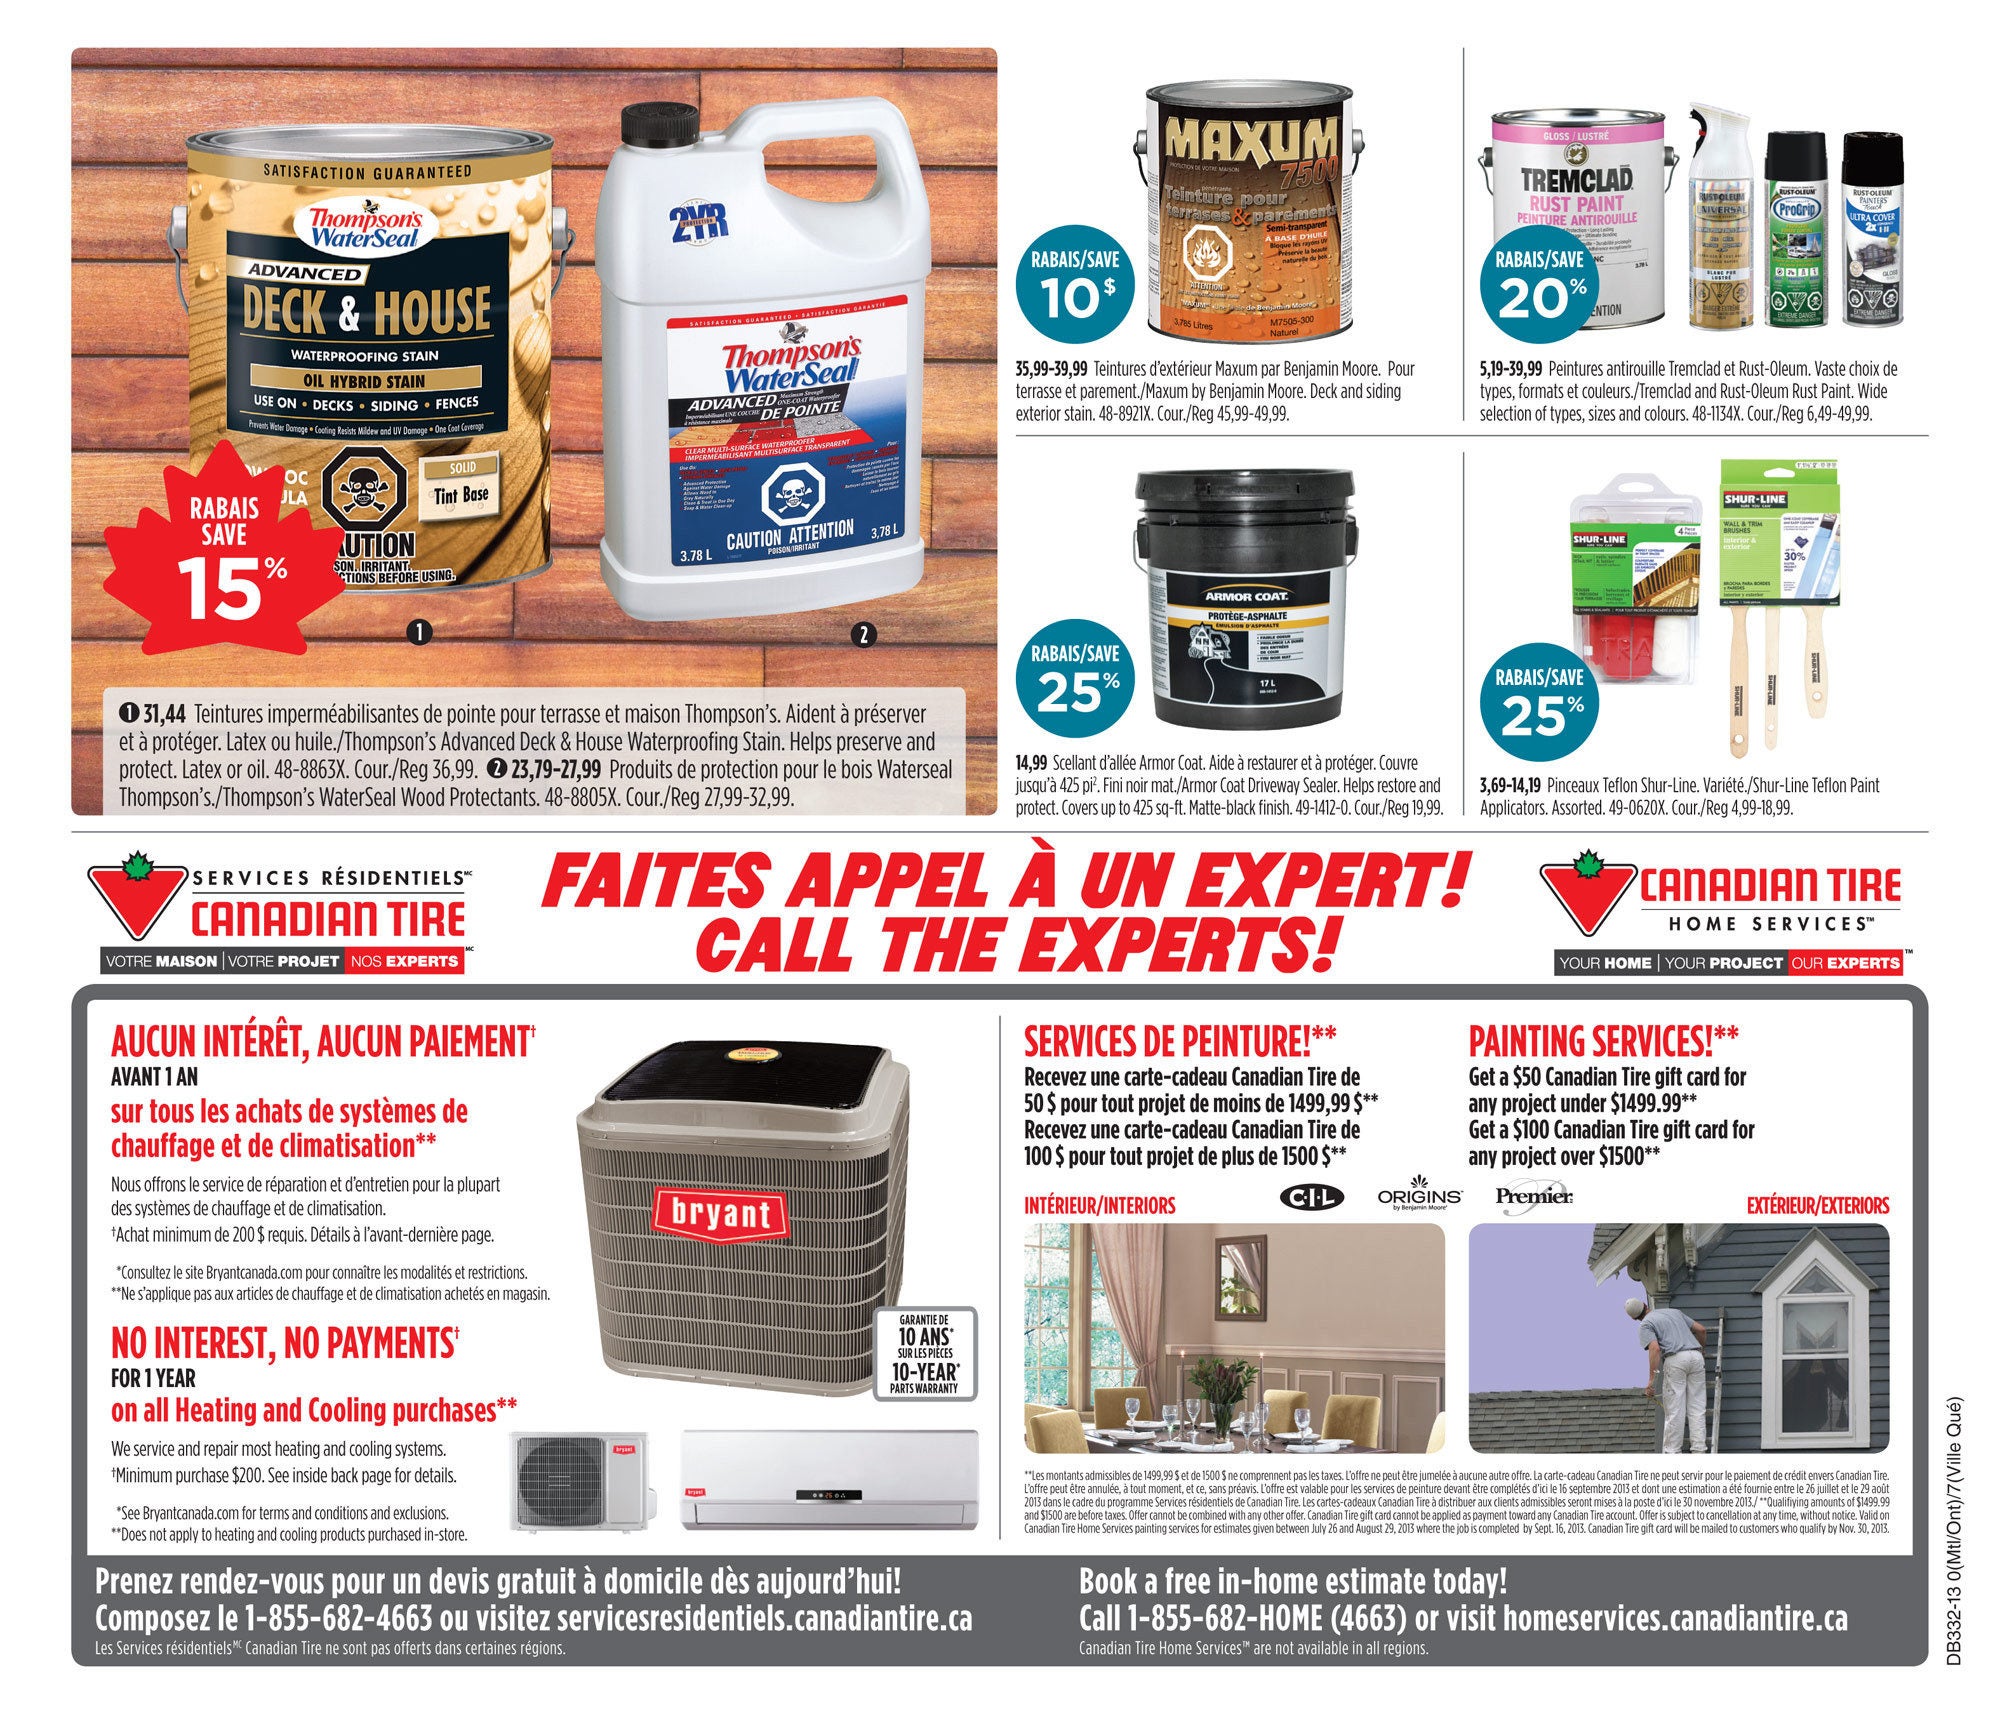 Canadian Tire Weekly Flyer Weekly Flyer Aug 1 8